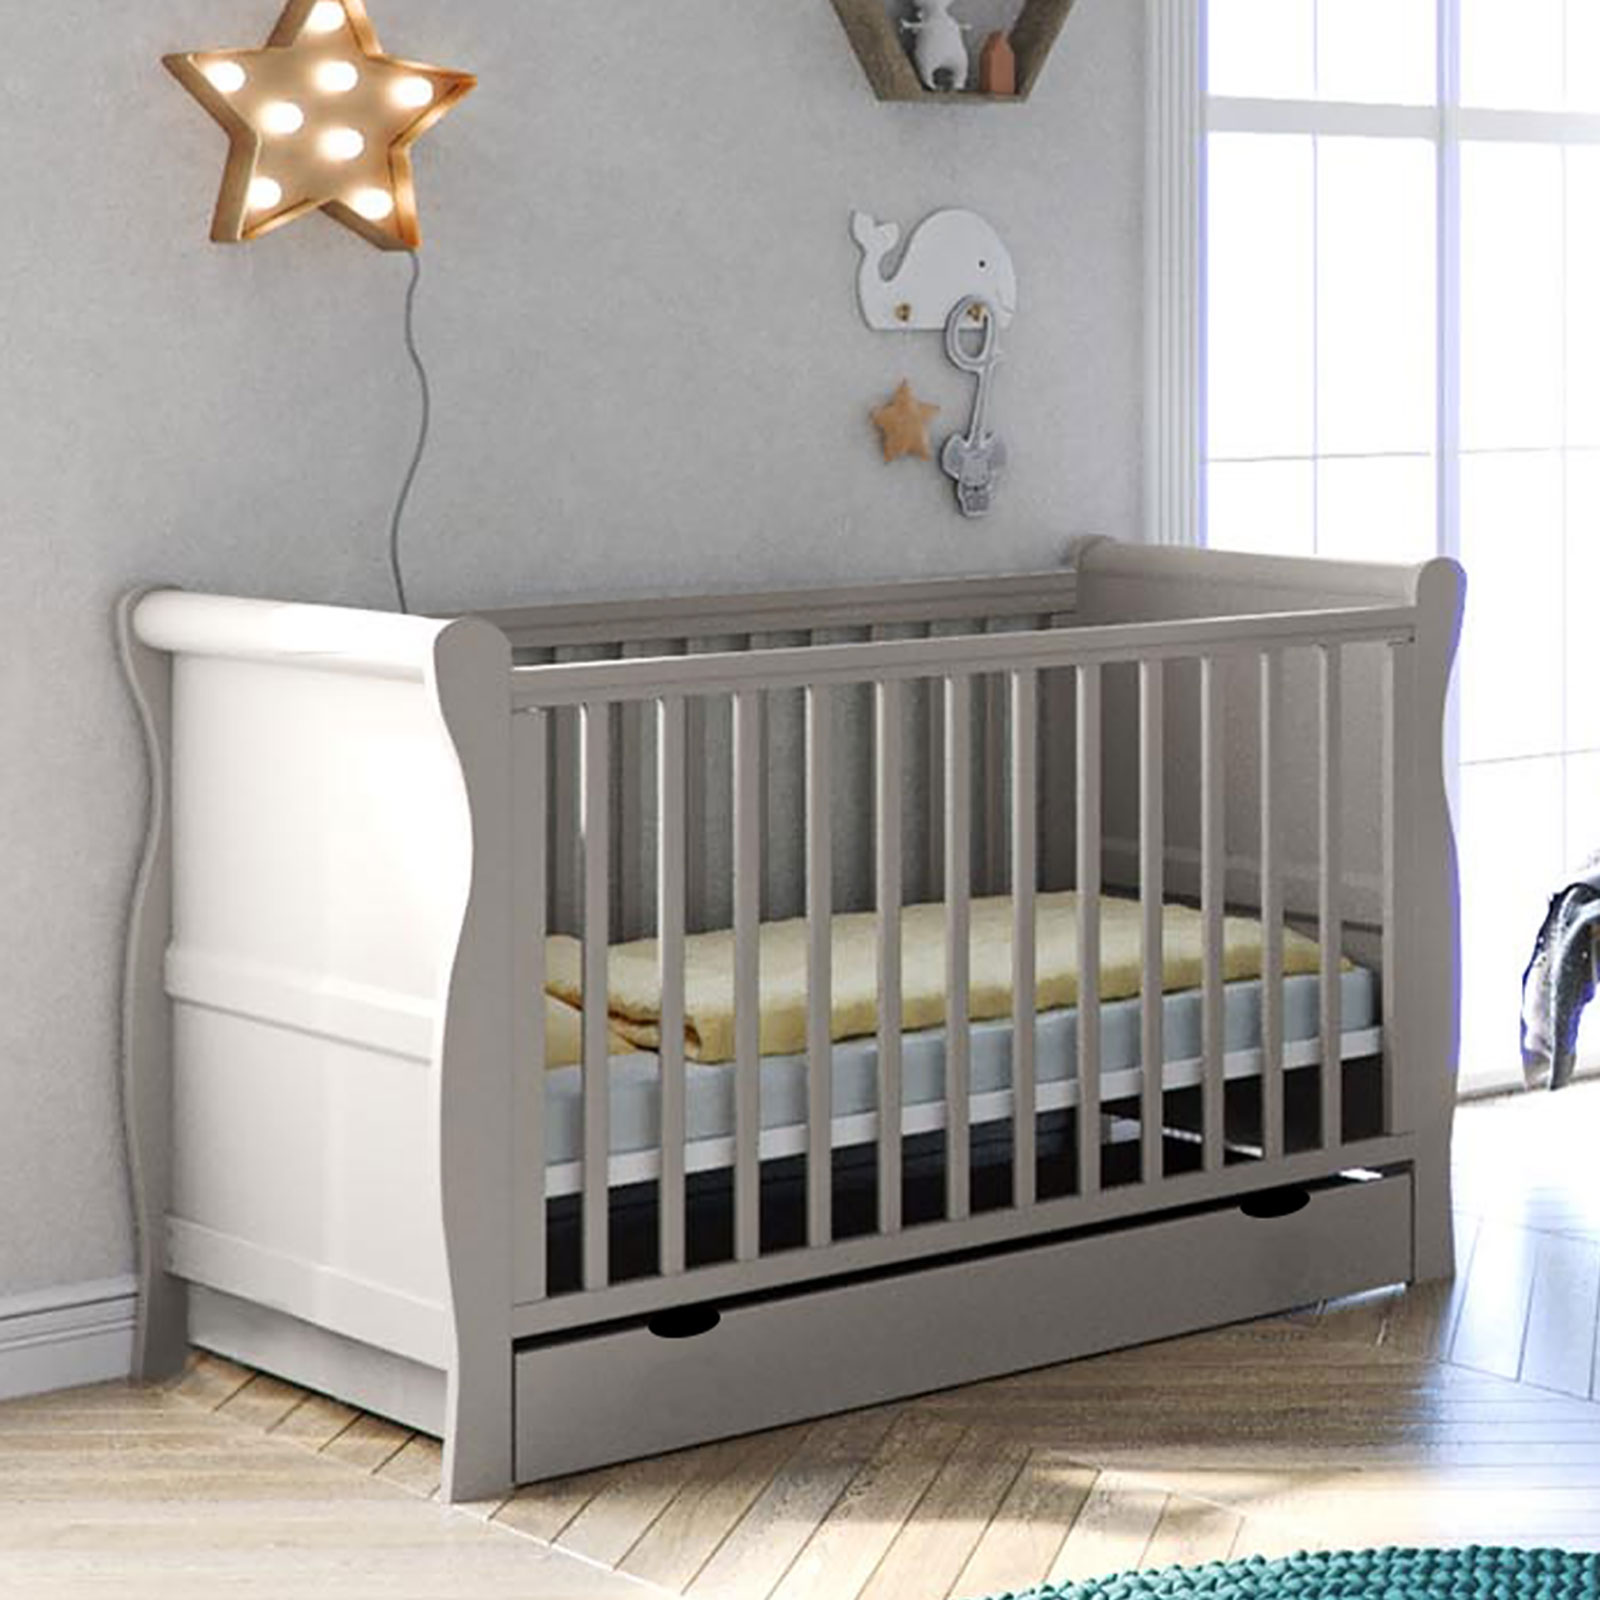 Puggle Alderley Sleigh Cot Bed with Drawer & Maxi Air Mattress - Classic Grey